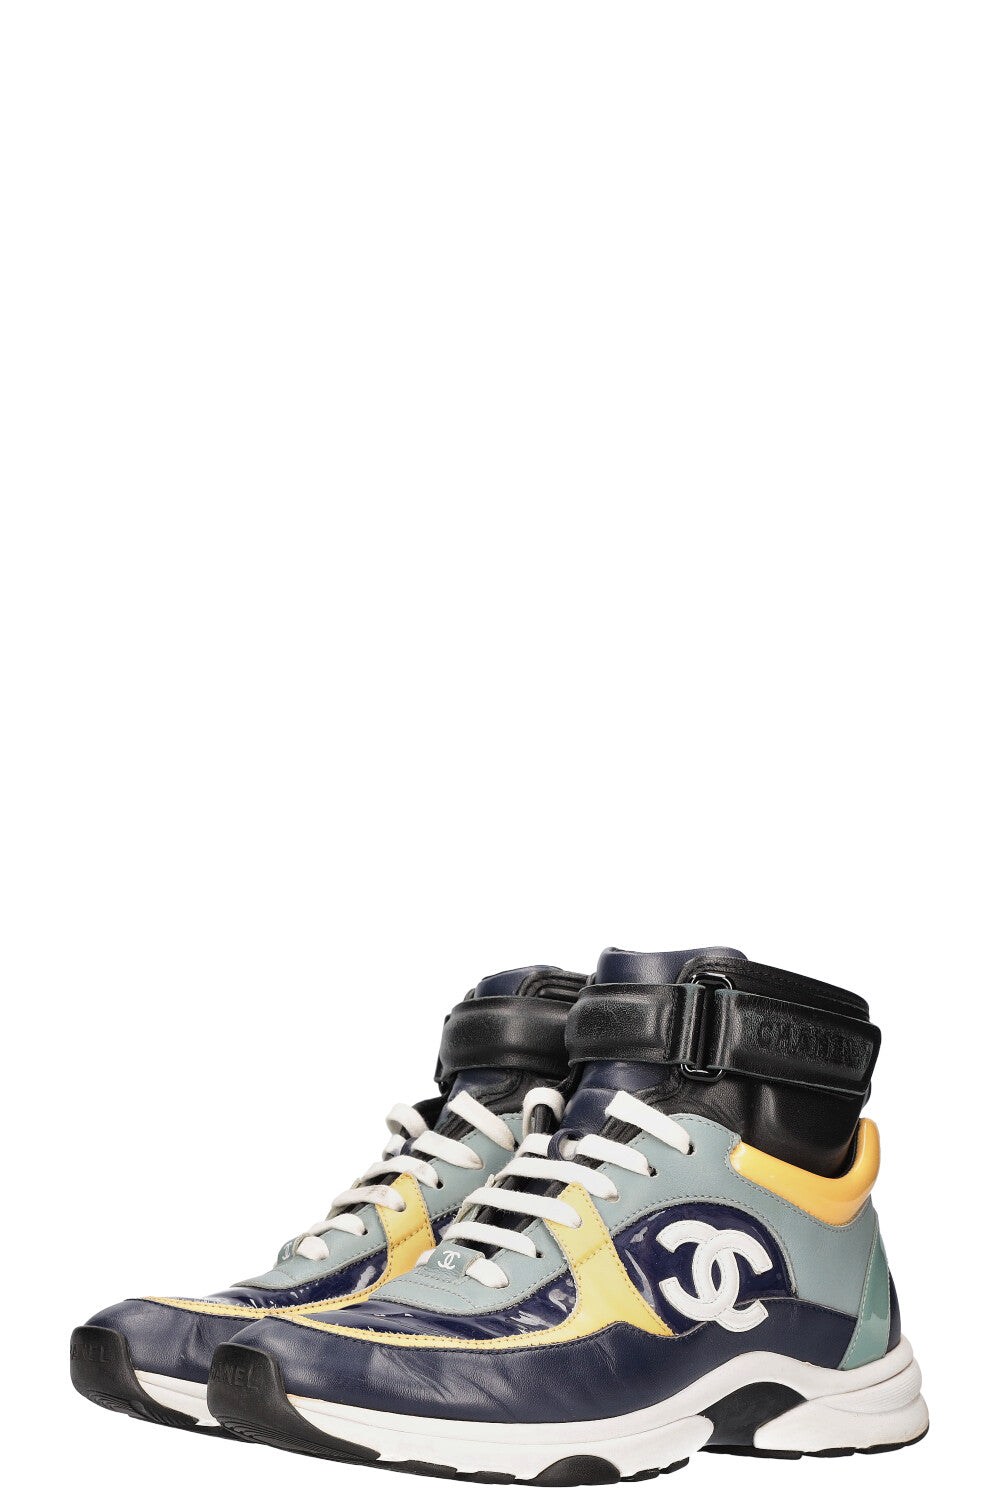 CHANEL High Top Sneakers Patent Blue